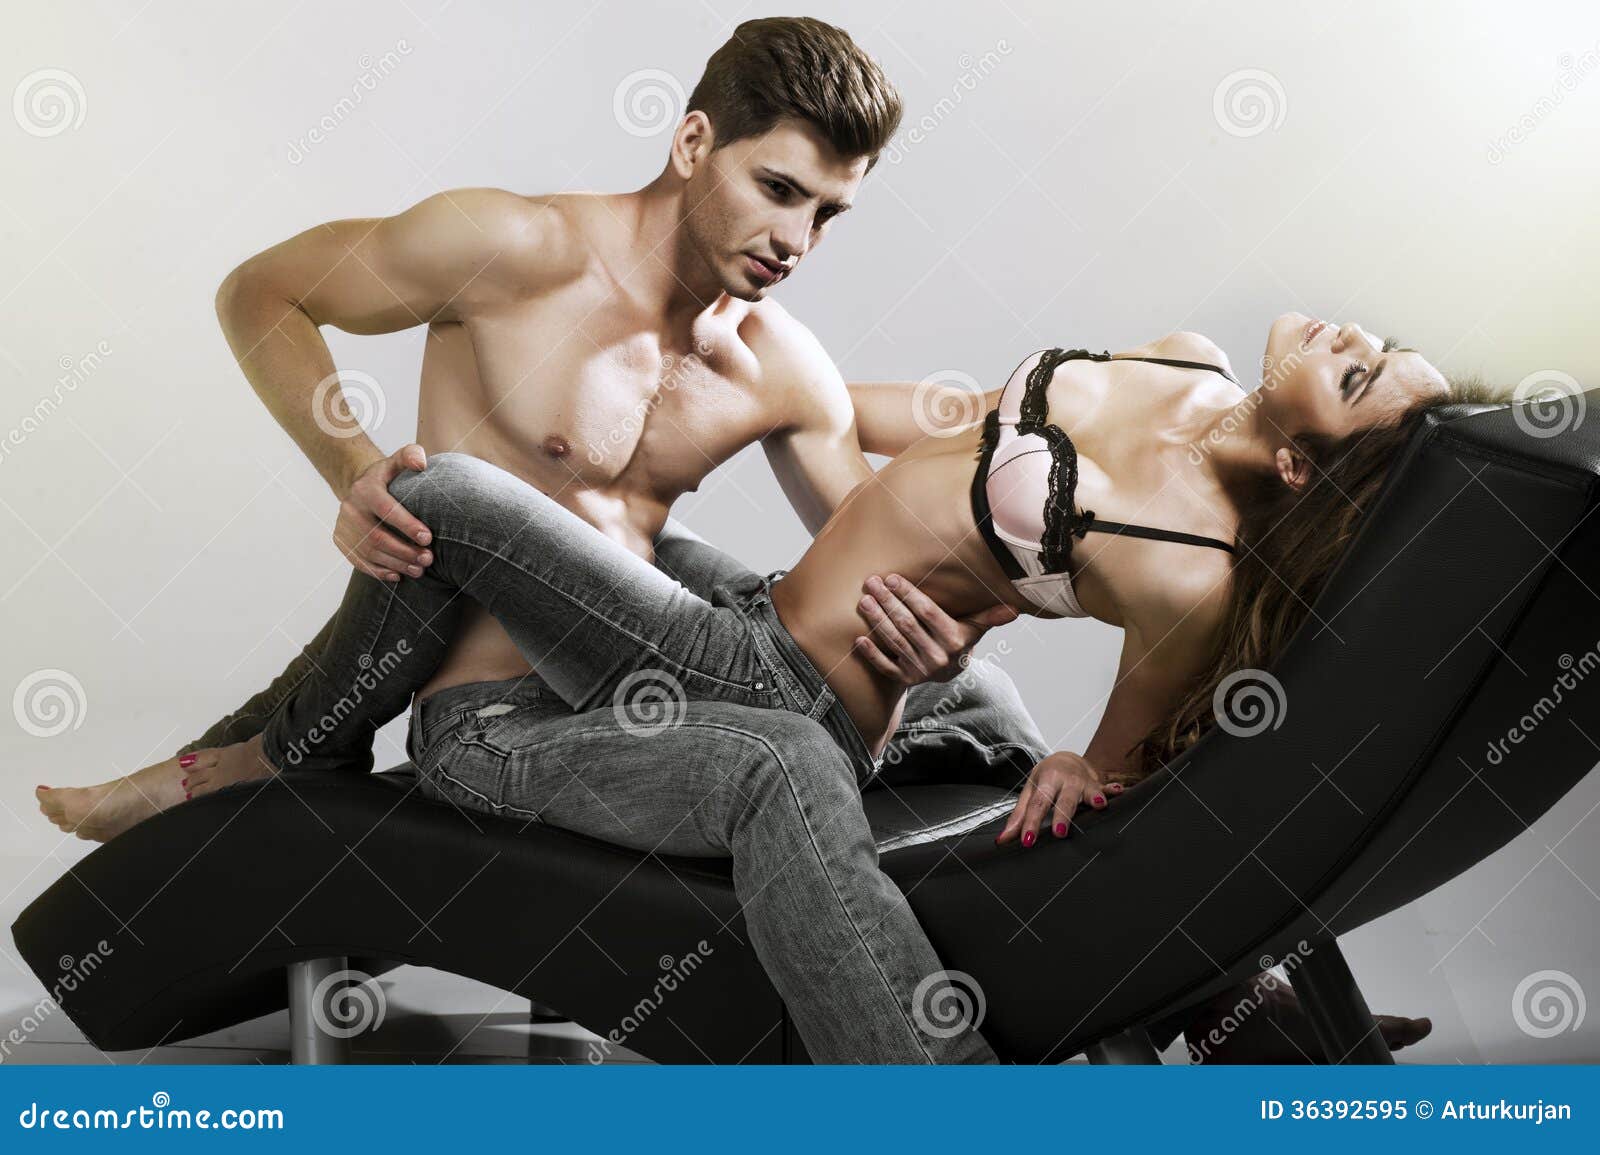 Man and Woman stock image Porn Photo Hd